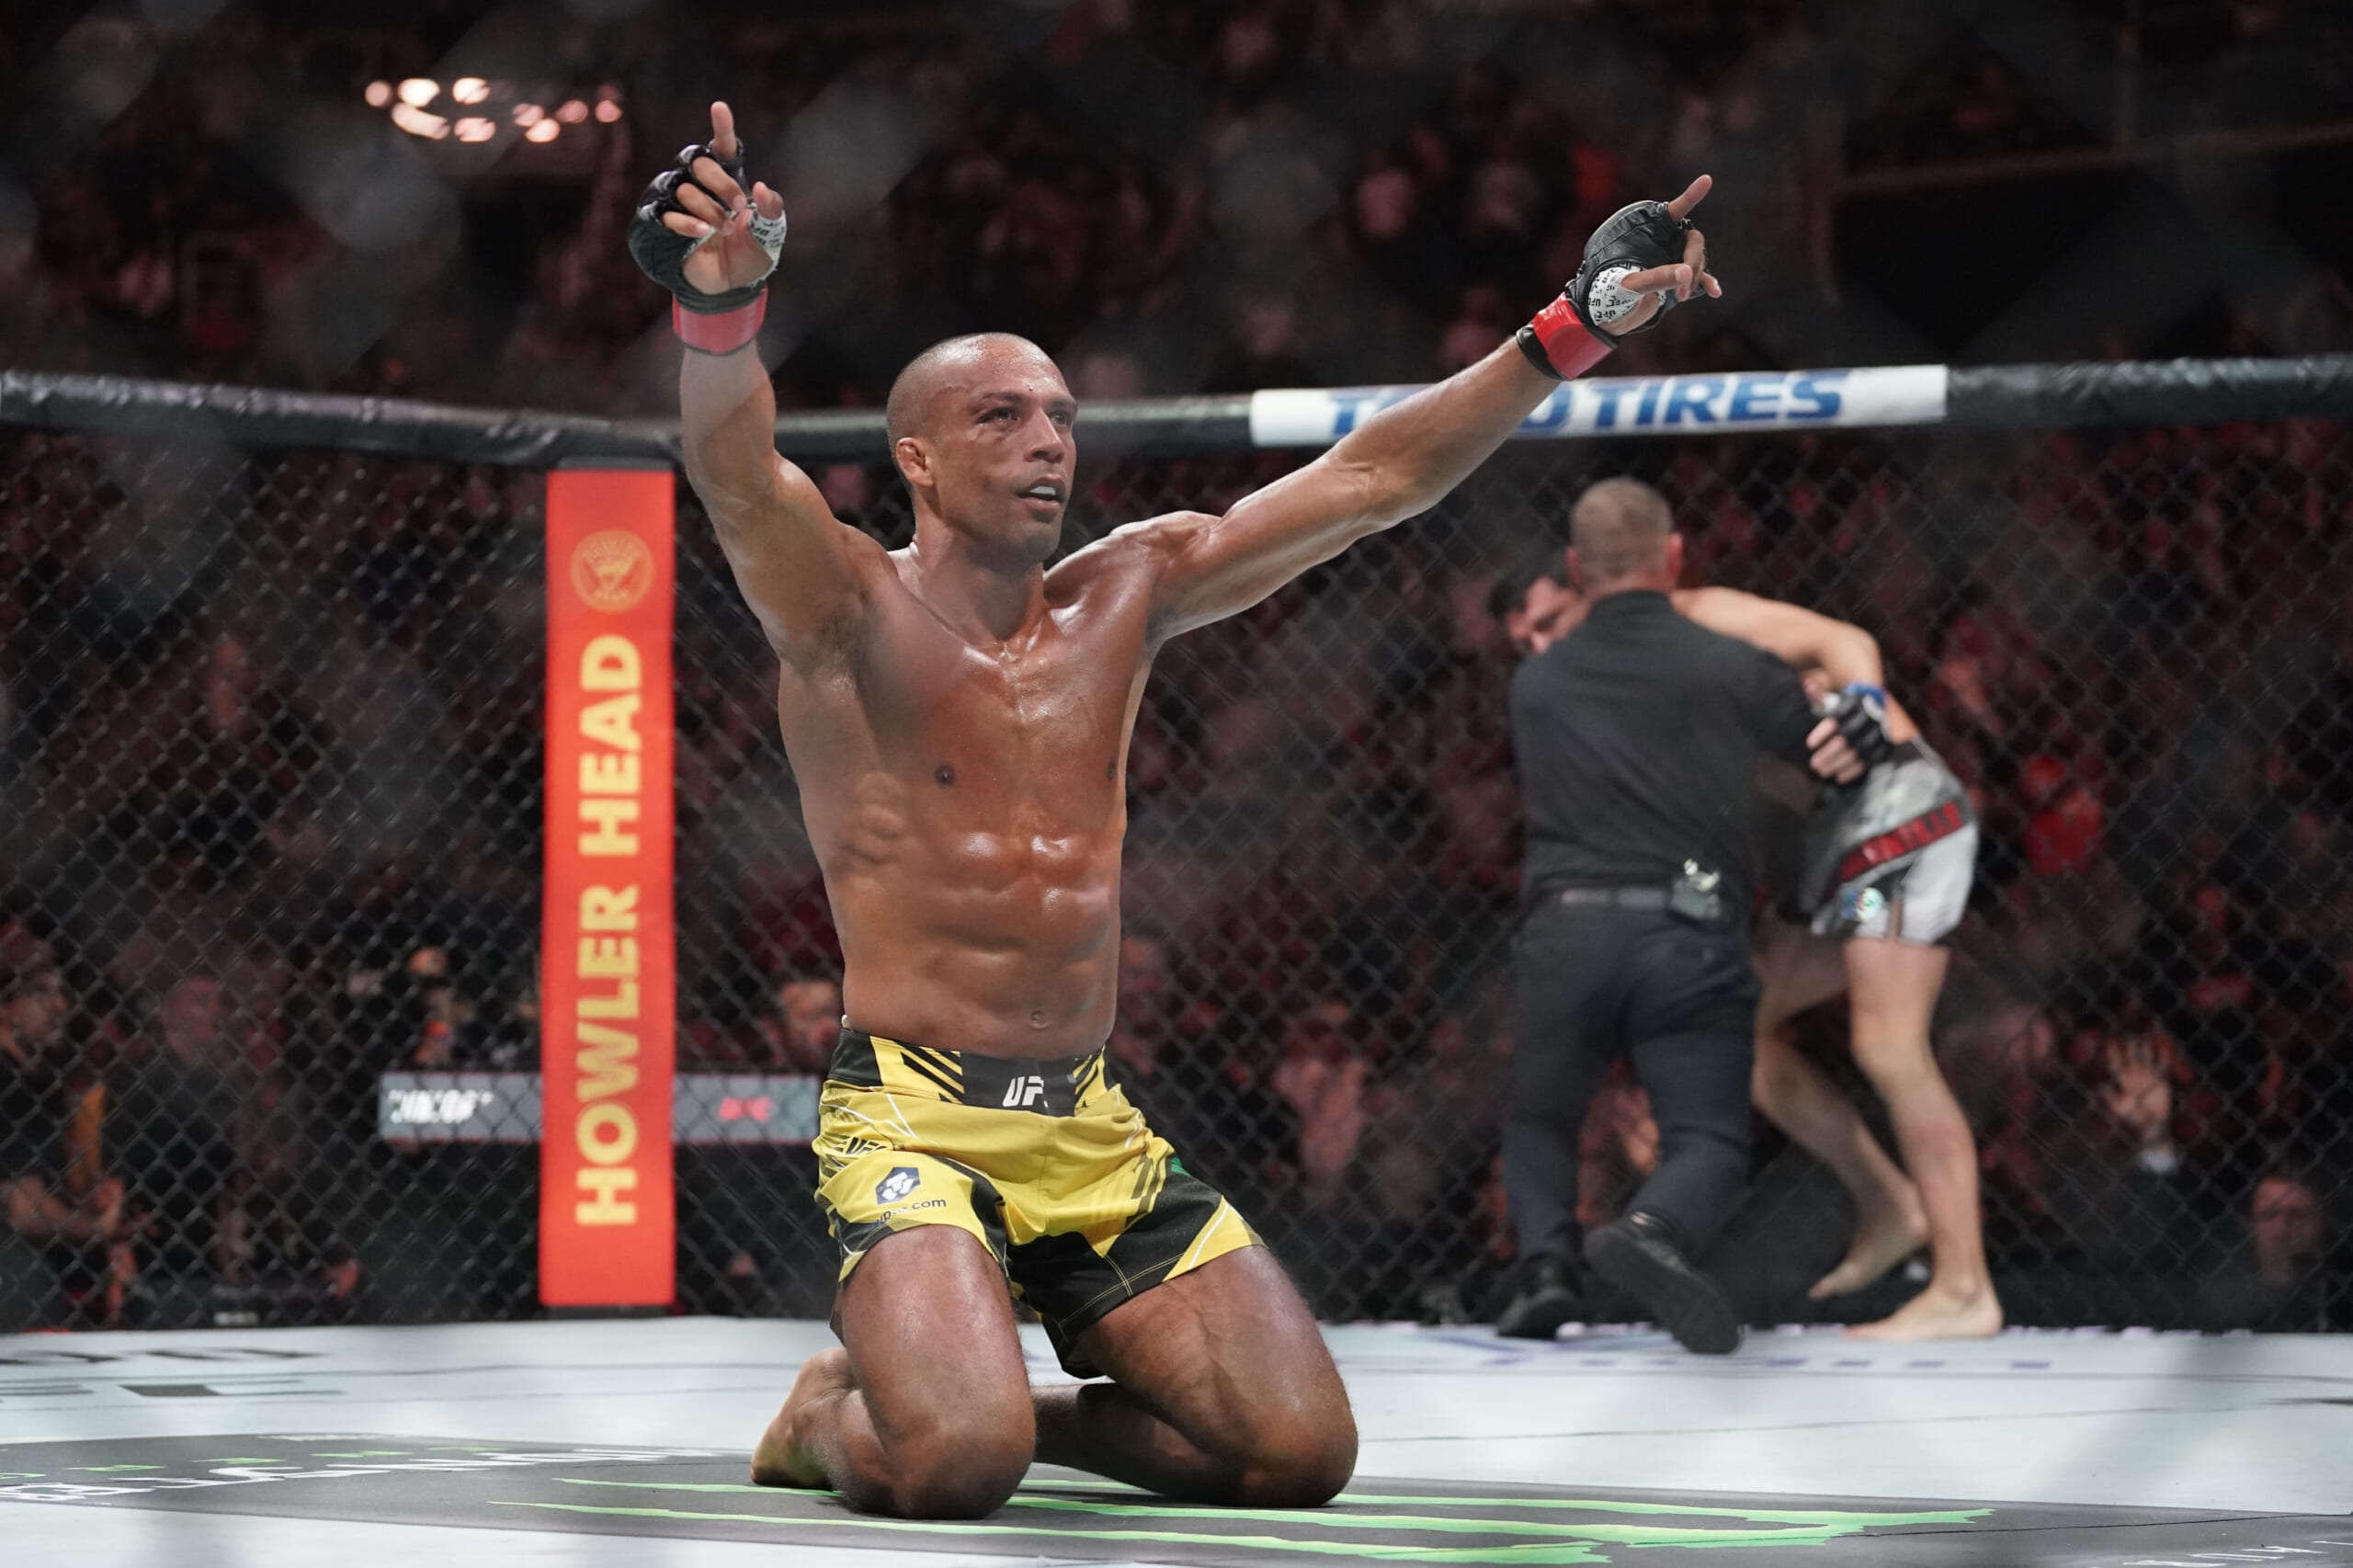 After huge knockout win at UFC Kansas City, who is next for Edson Barboza?